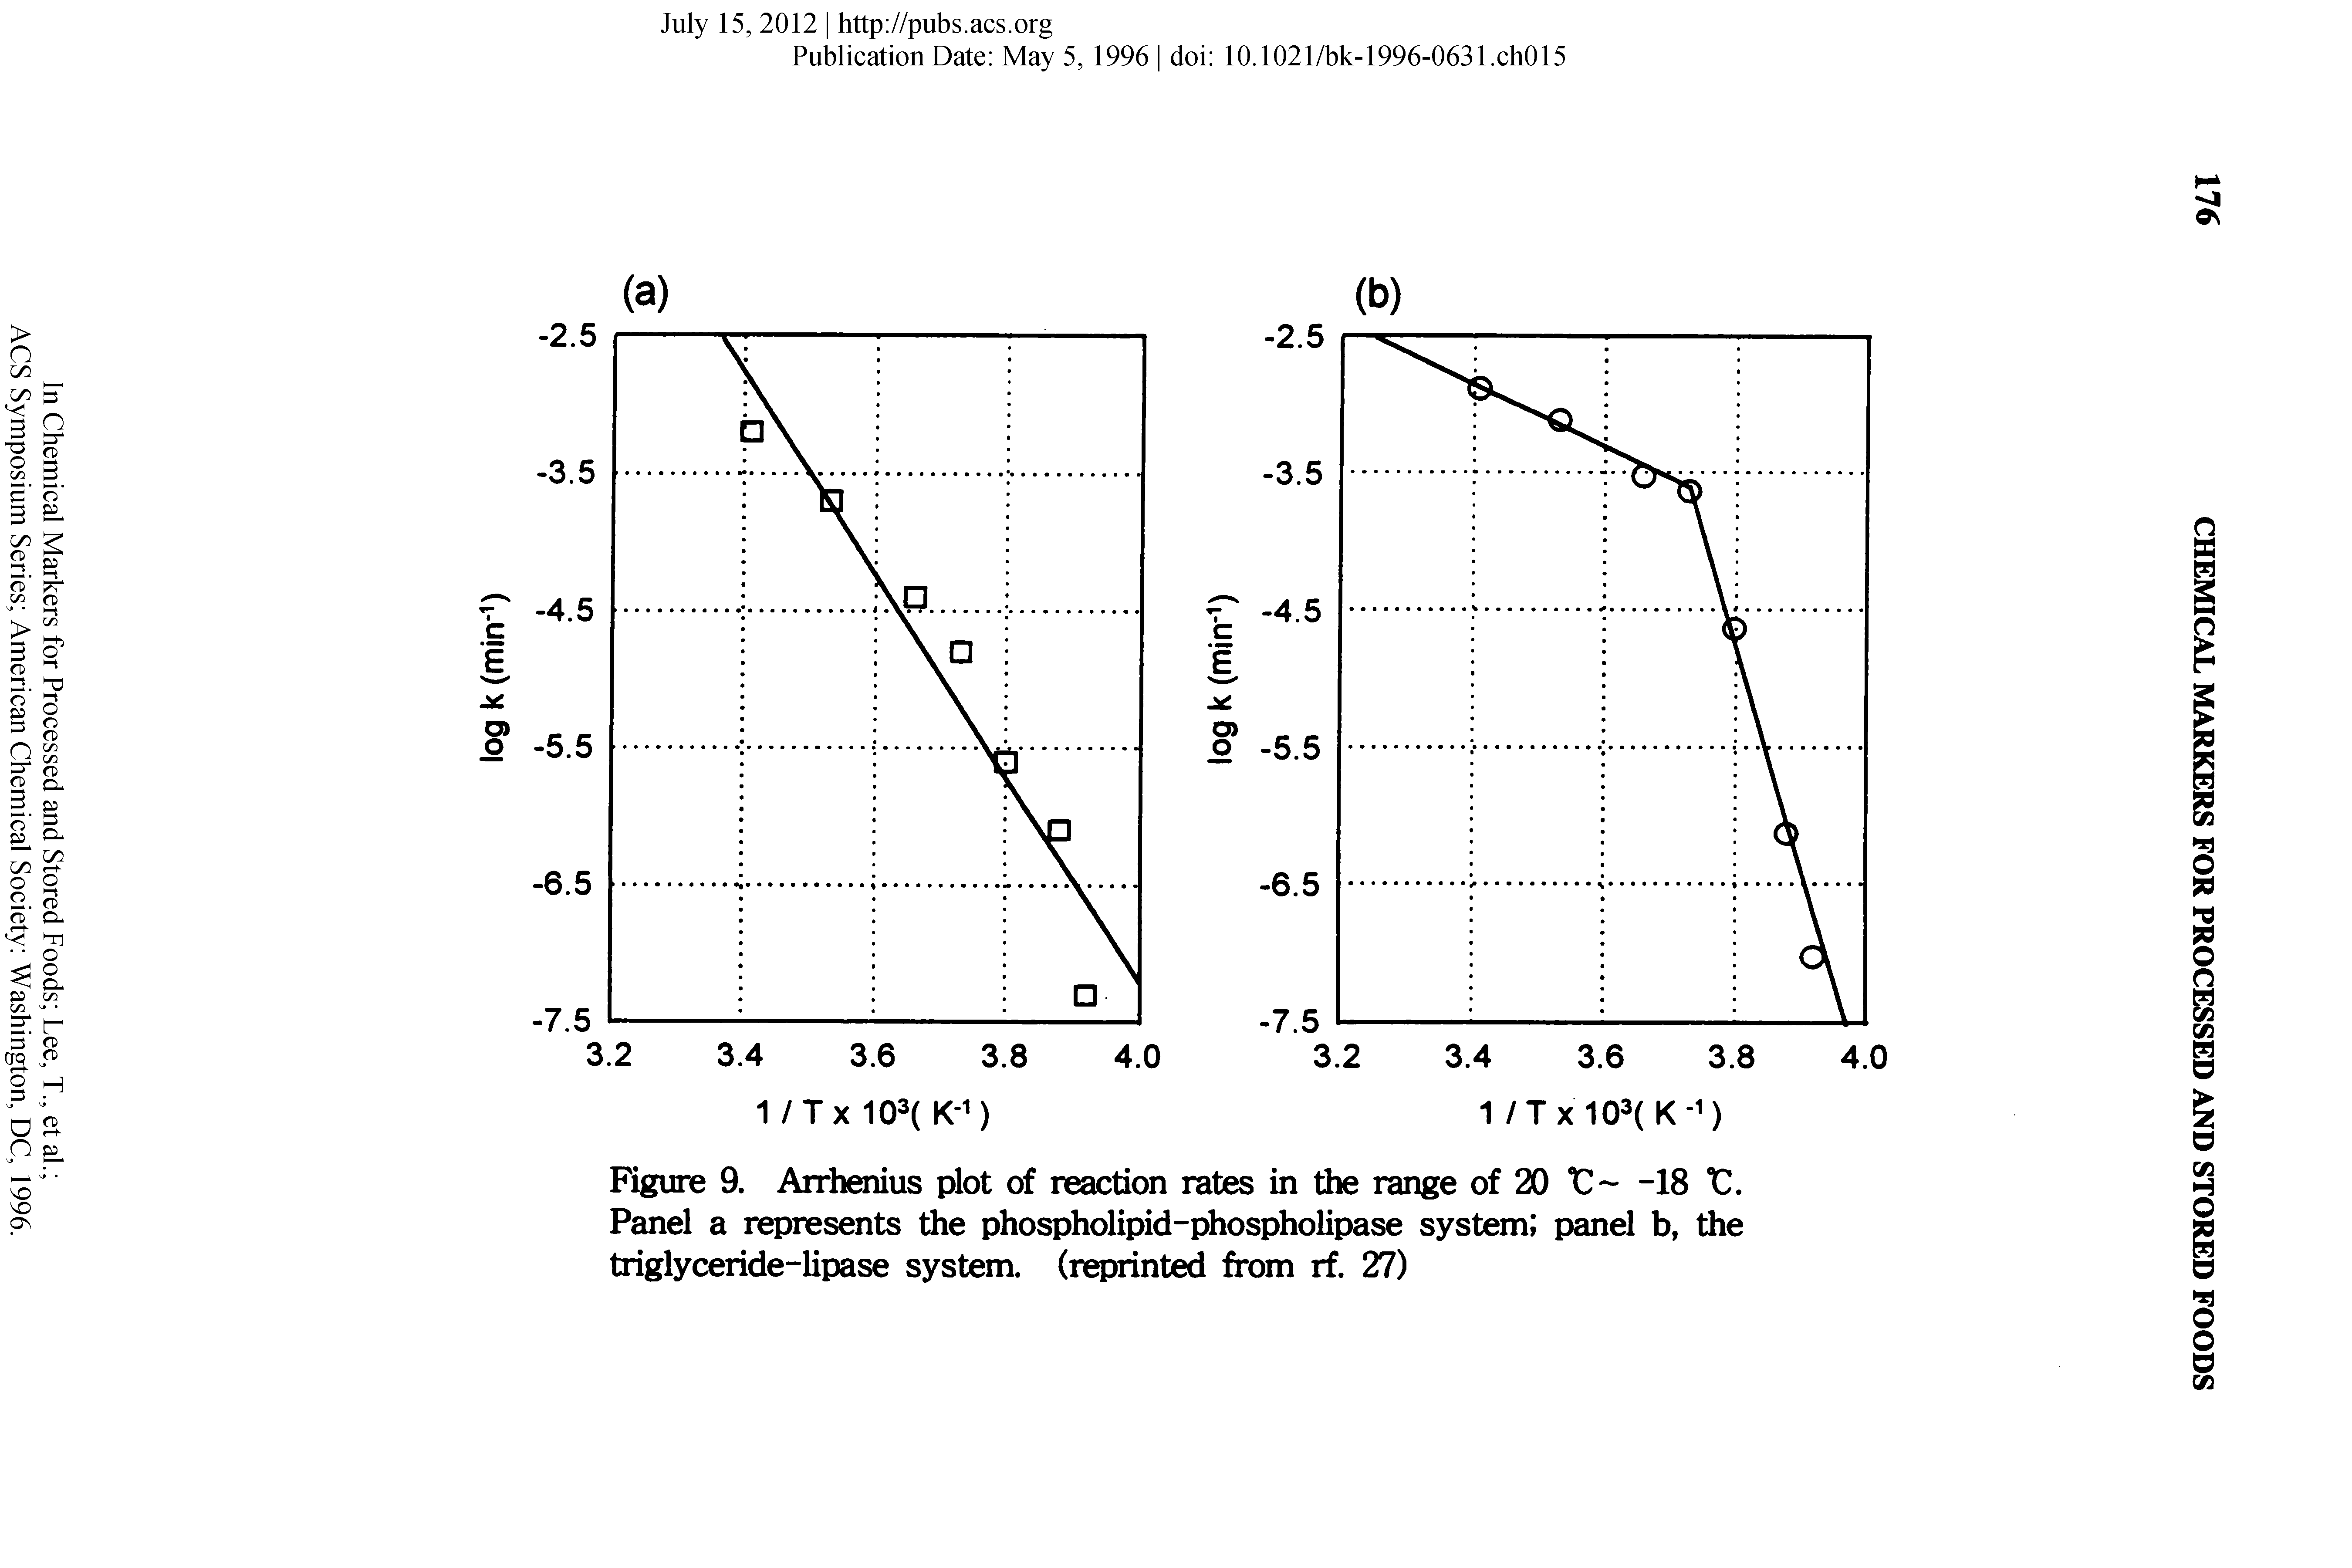 Figure 9. Arrhenius plot of reaction rates in the range of 20 0-—18 C. Panel a represents the phospholipid-phospholipase system panel b, the triglyceride-lipase system, (reprinted from rf. 27)...